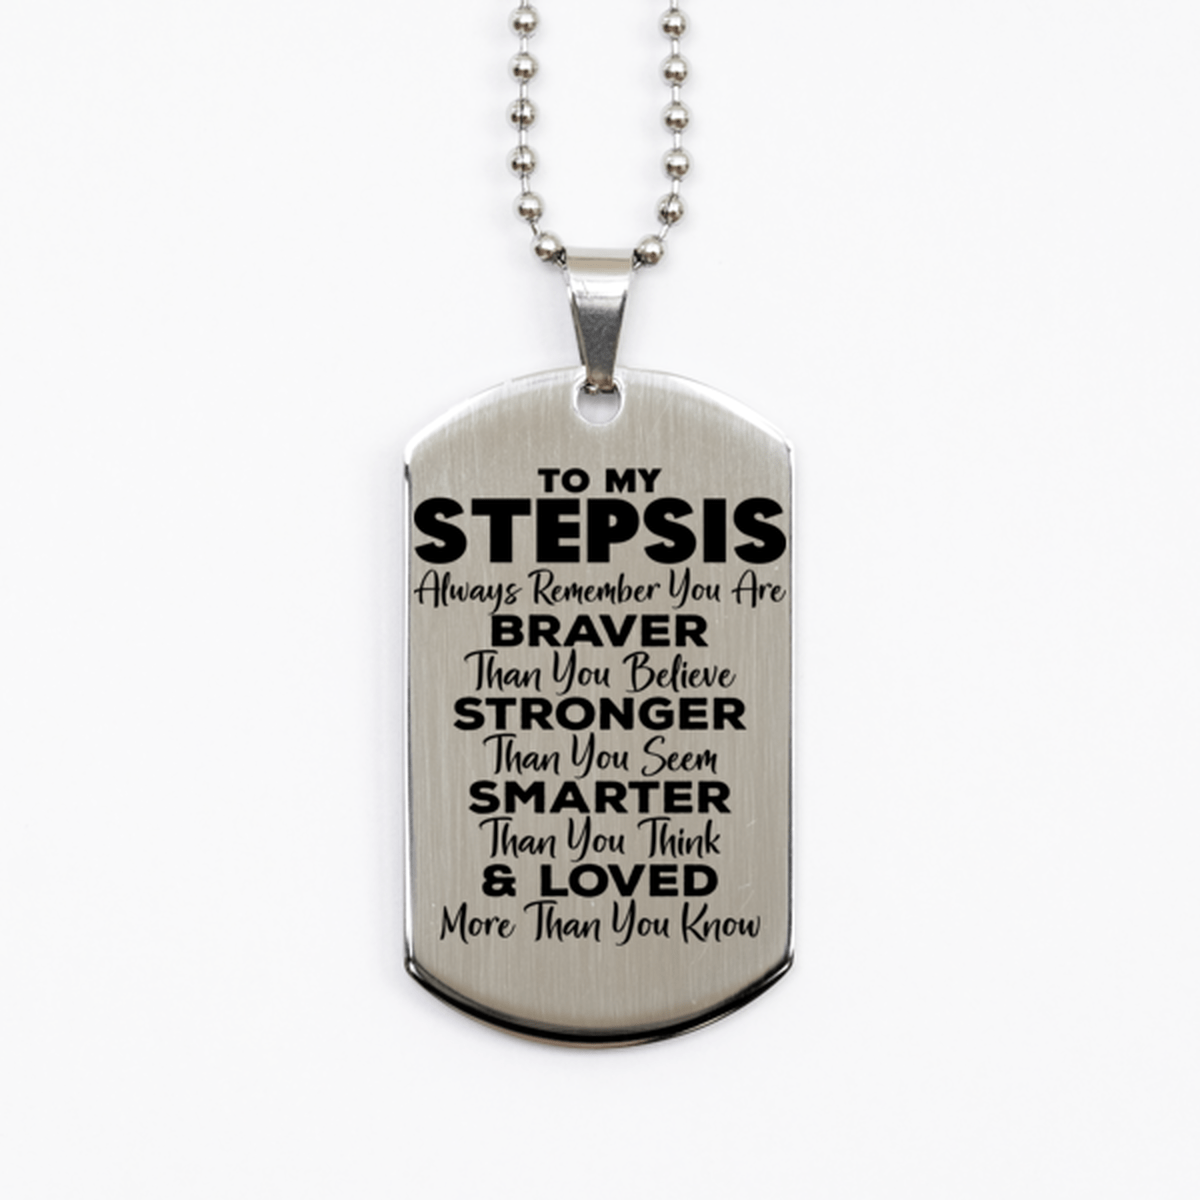 Motivational Stepsis Silver Dog Tag Necklace, Stepsis Always Remember You Are Braver Than You Believe, Best Birthday Gifts for Stepsis